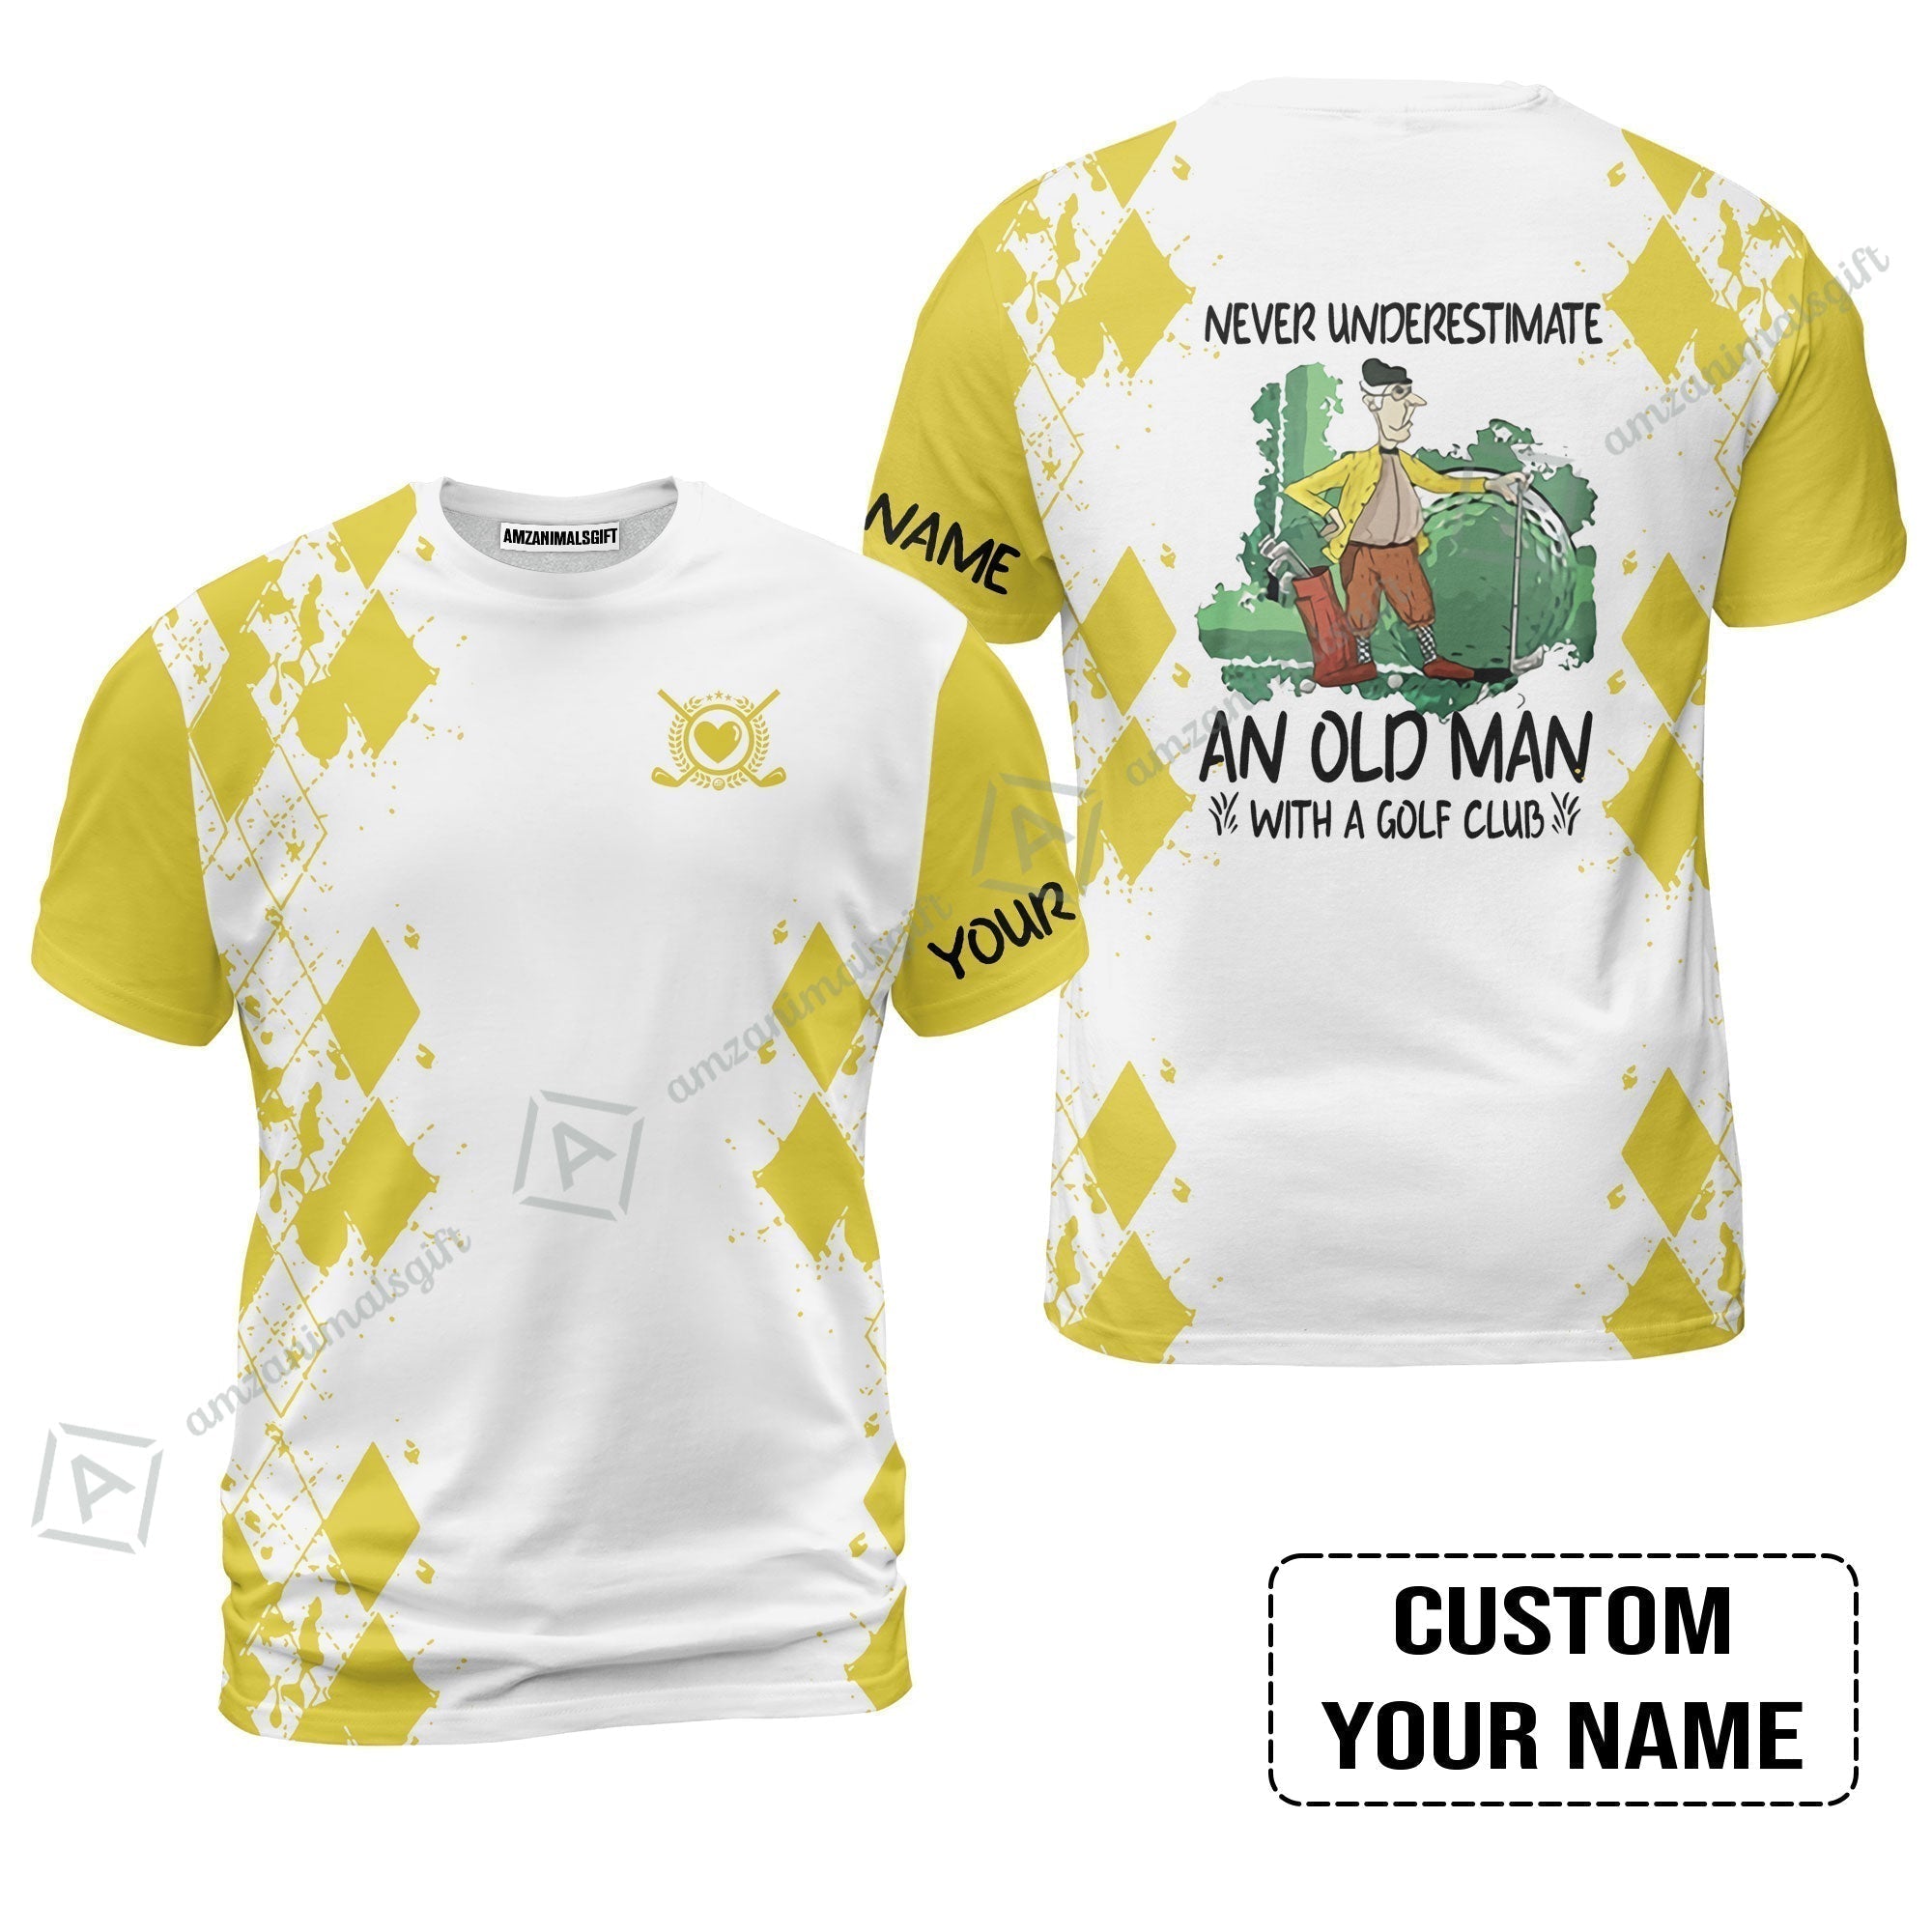 Golf T-Shirt - Argyle Pattern Custom Name Apparel - Never Underestimate An Old Man With A Golf Club T-Shirt